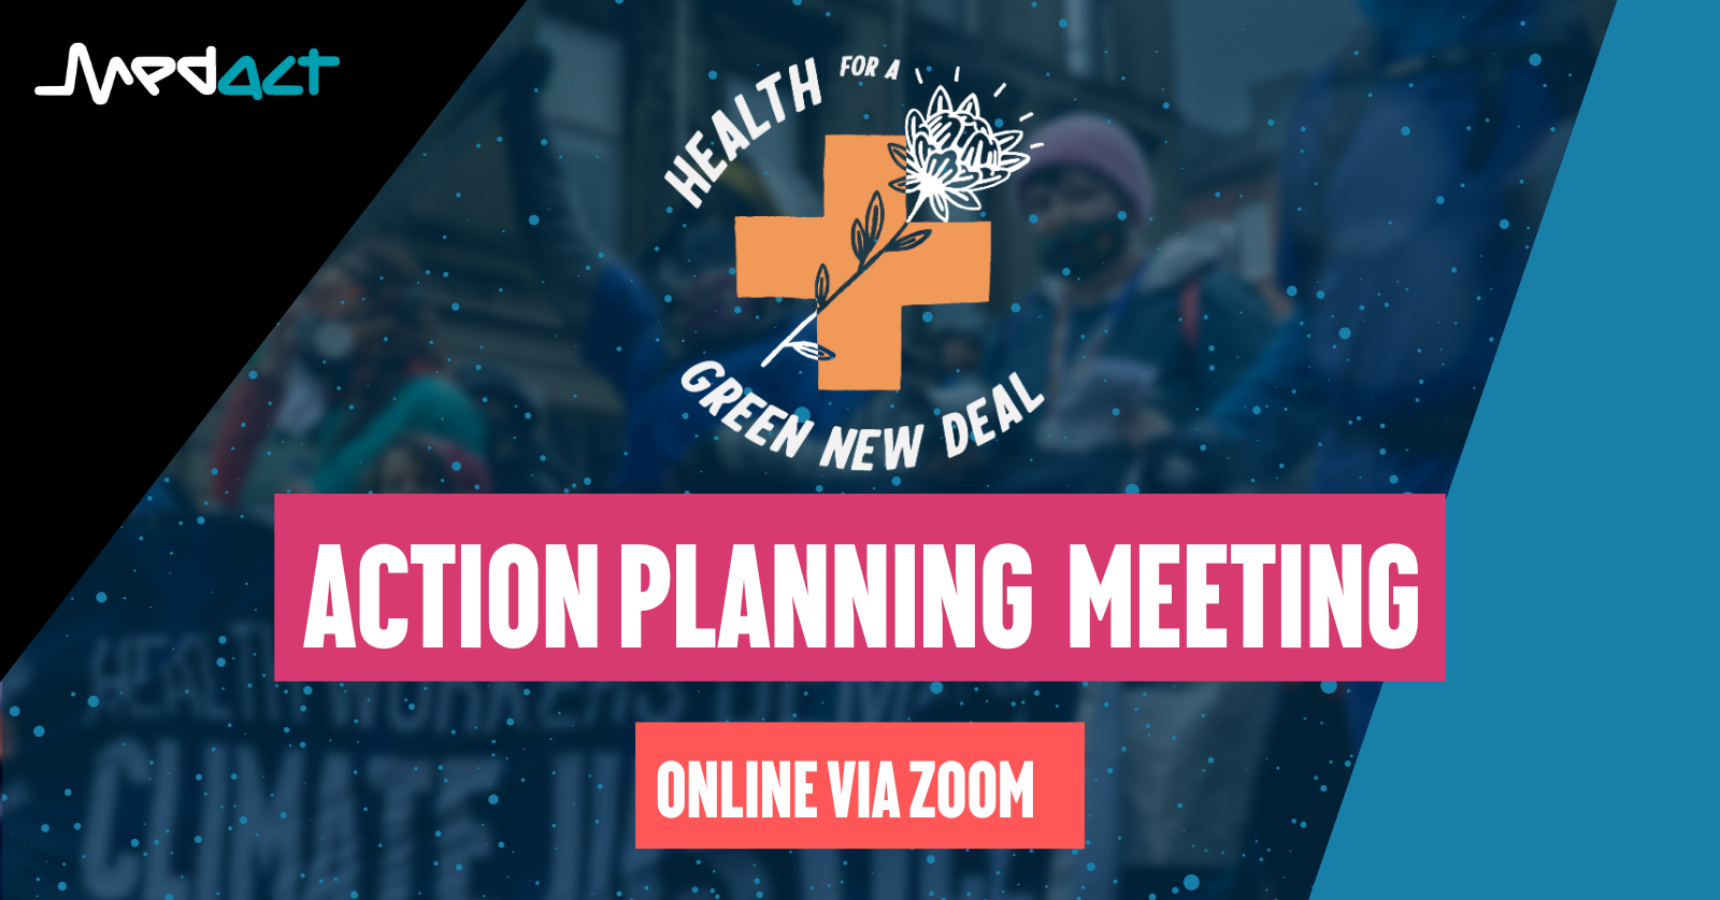 Health for a Green New Deal: April Action Planning Meeting